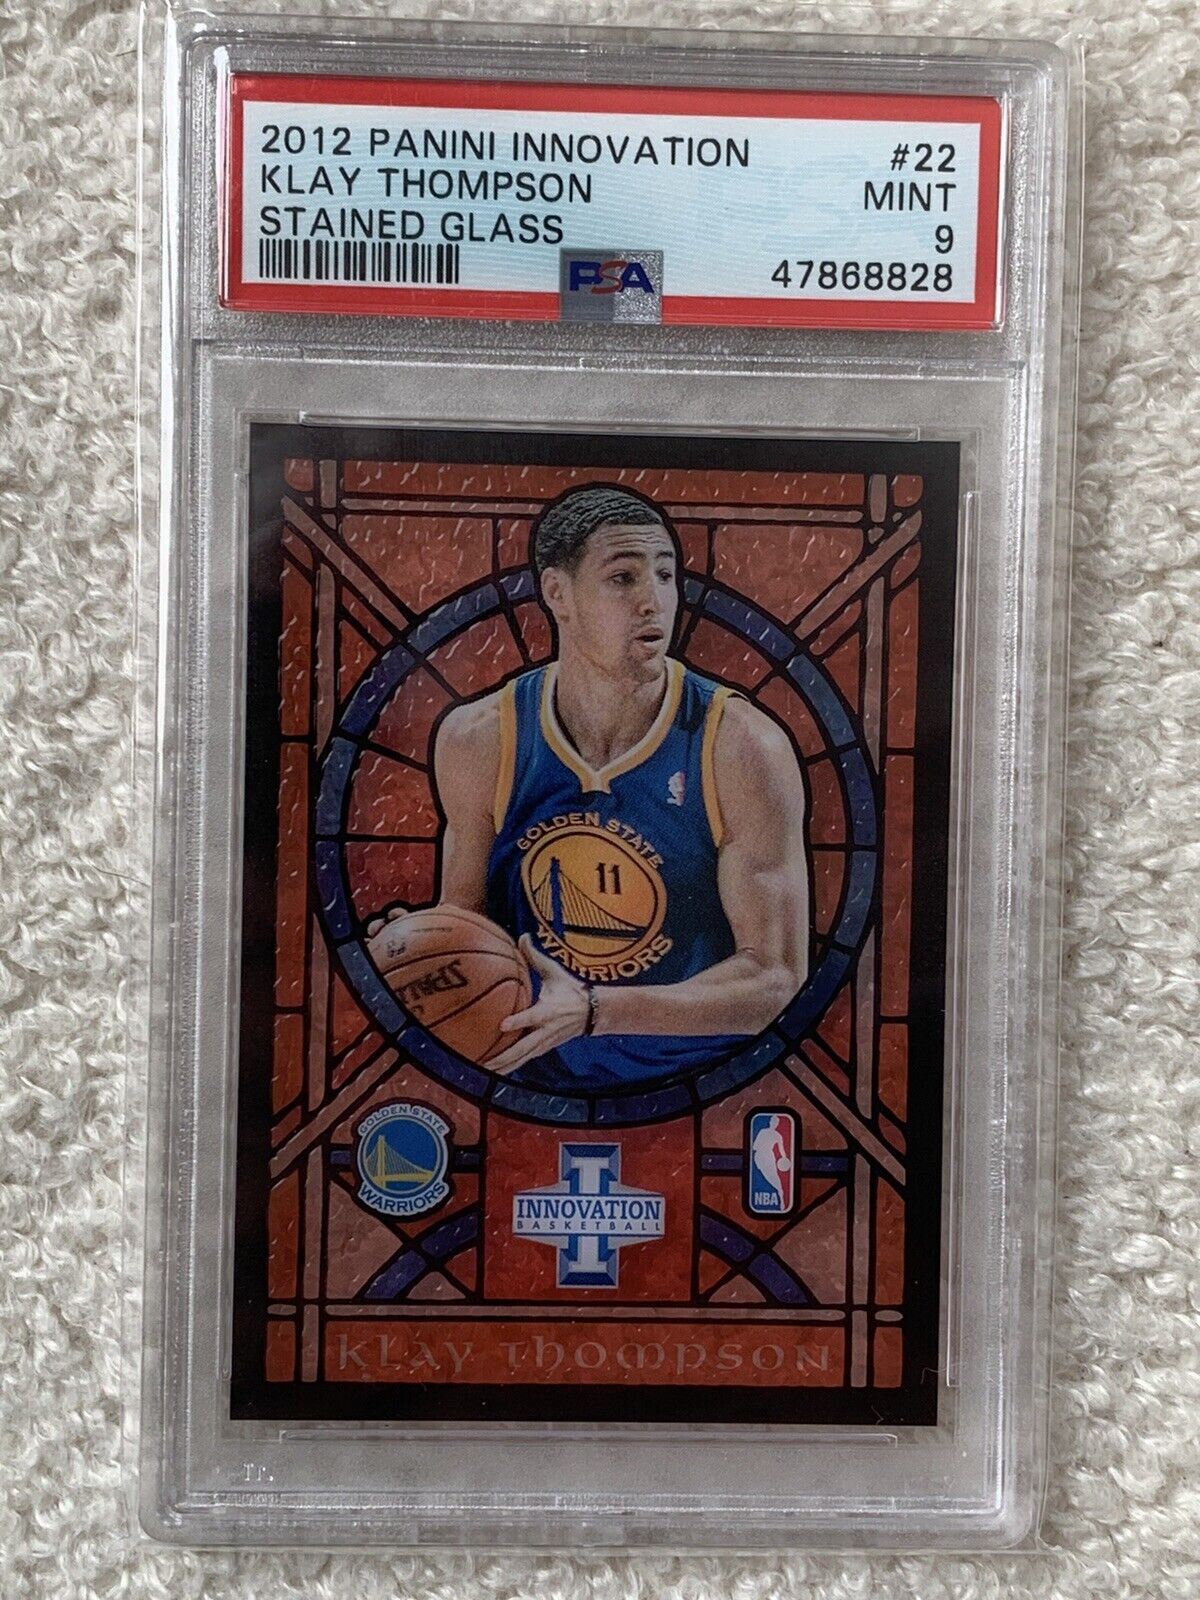 Klay Thompson 2012 Panini Innovation Stained Glass #22 Rookie RC PSA 9 Pop 5!